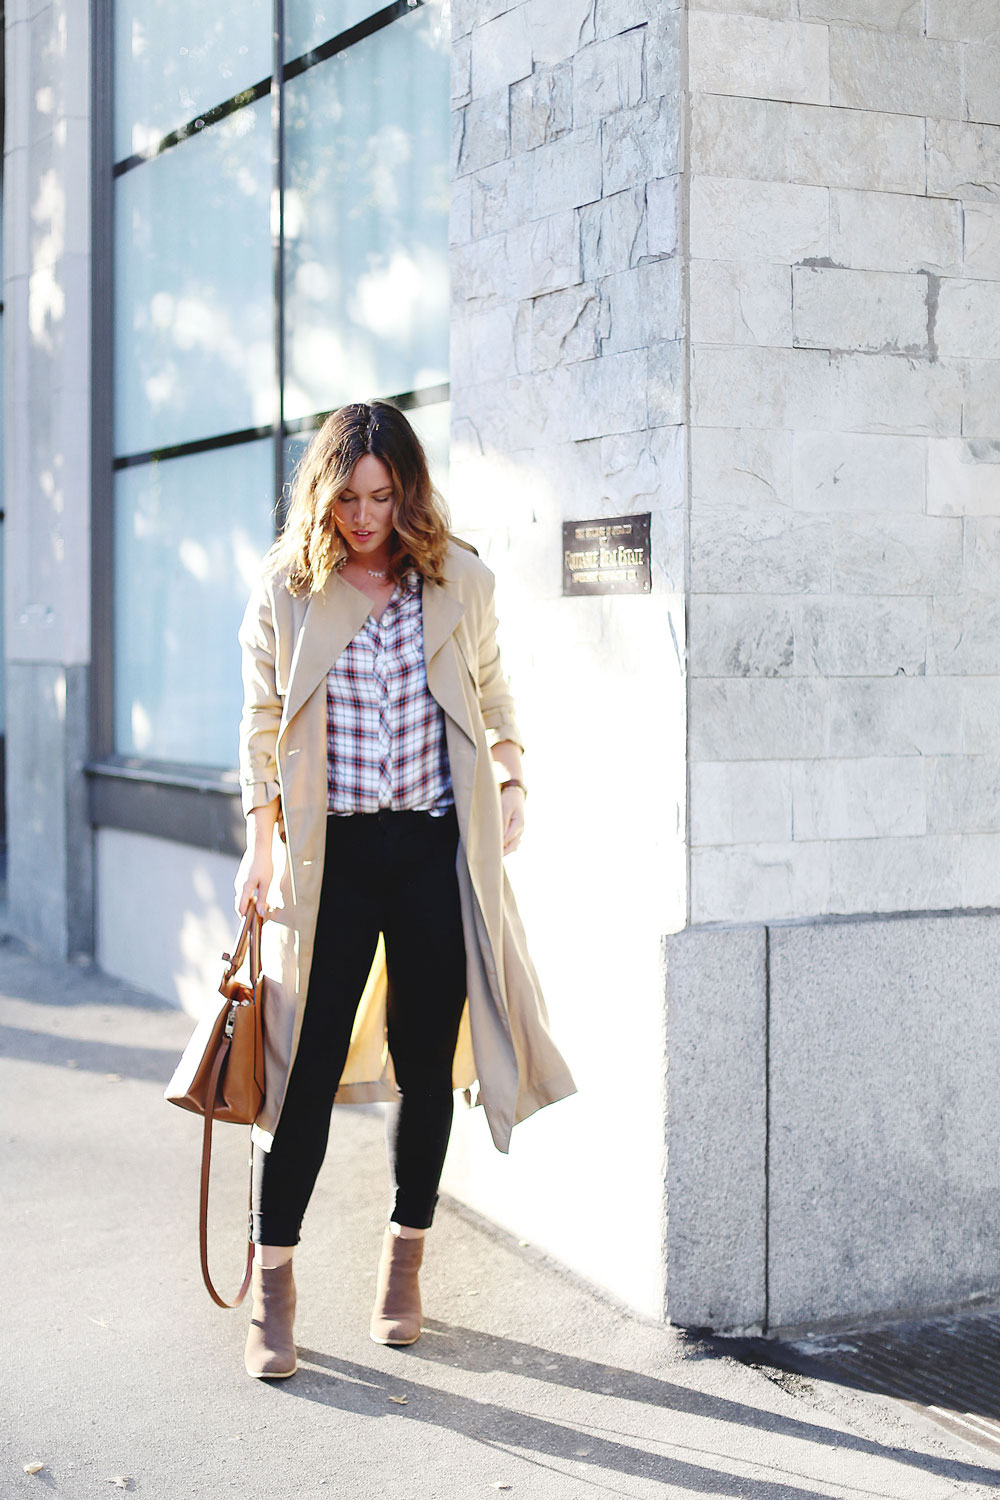 How to wear a plaid shirt in Gentle Fawn blouse, Hudson Jeans skinny jeans, Aritzia bega bag, Aritzia trench coat, Urban Outfitters ankle boots, Leah Alexandra jewelry, Daniel Wellington watch